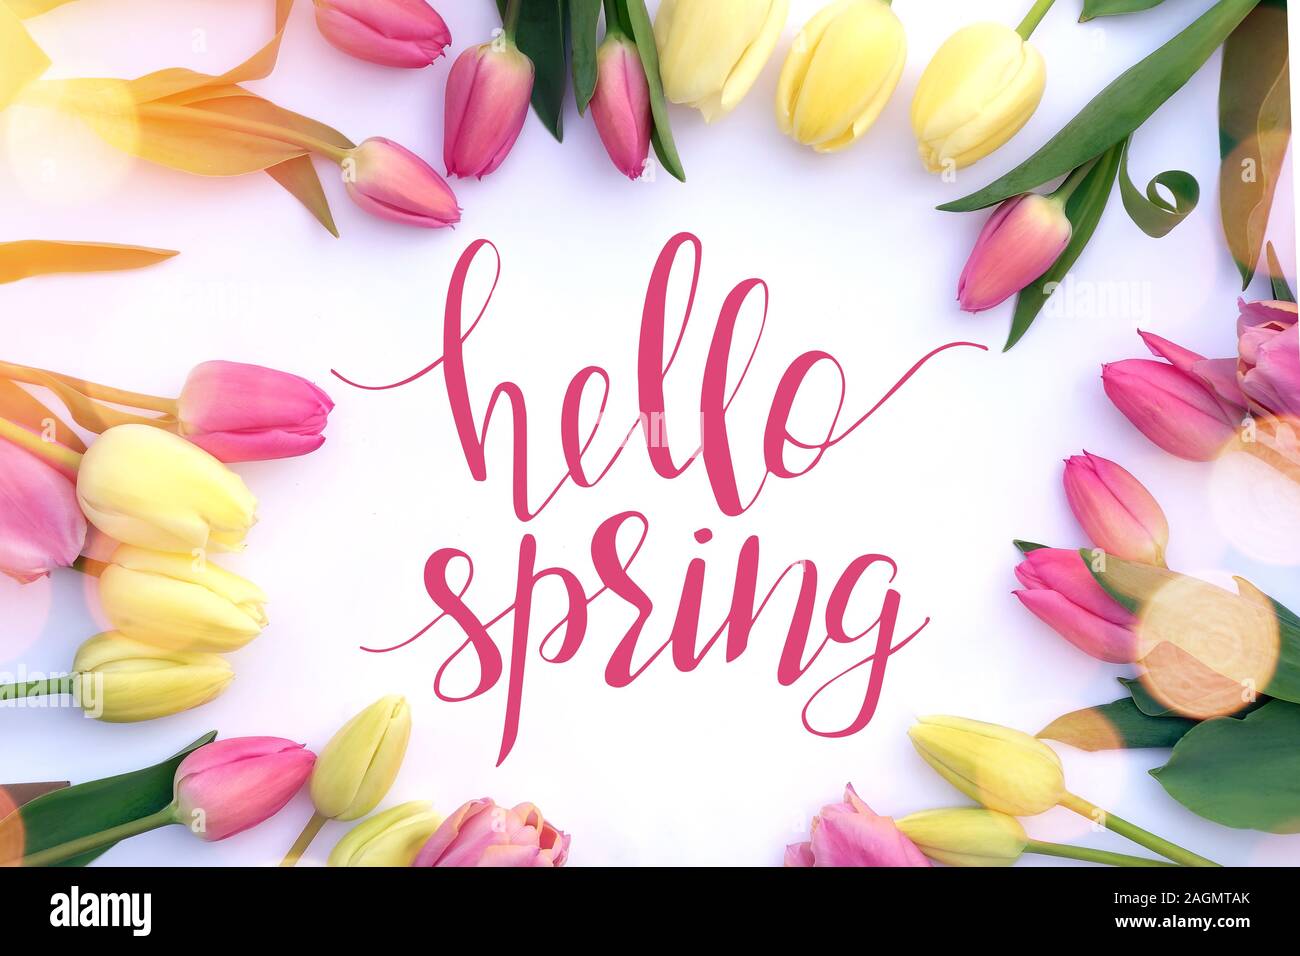 Colorful fresh tulips on white background and text hello spring. Stock Photo